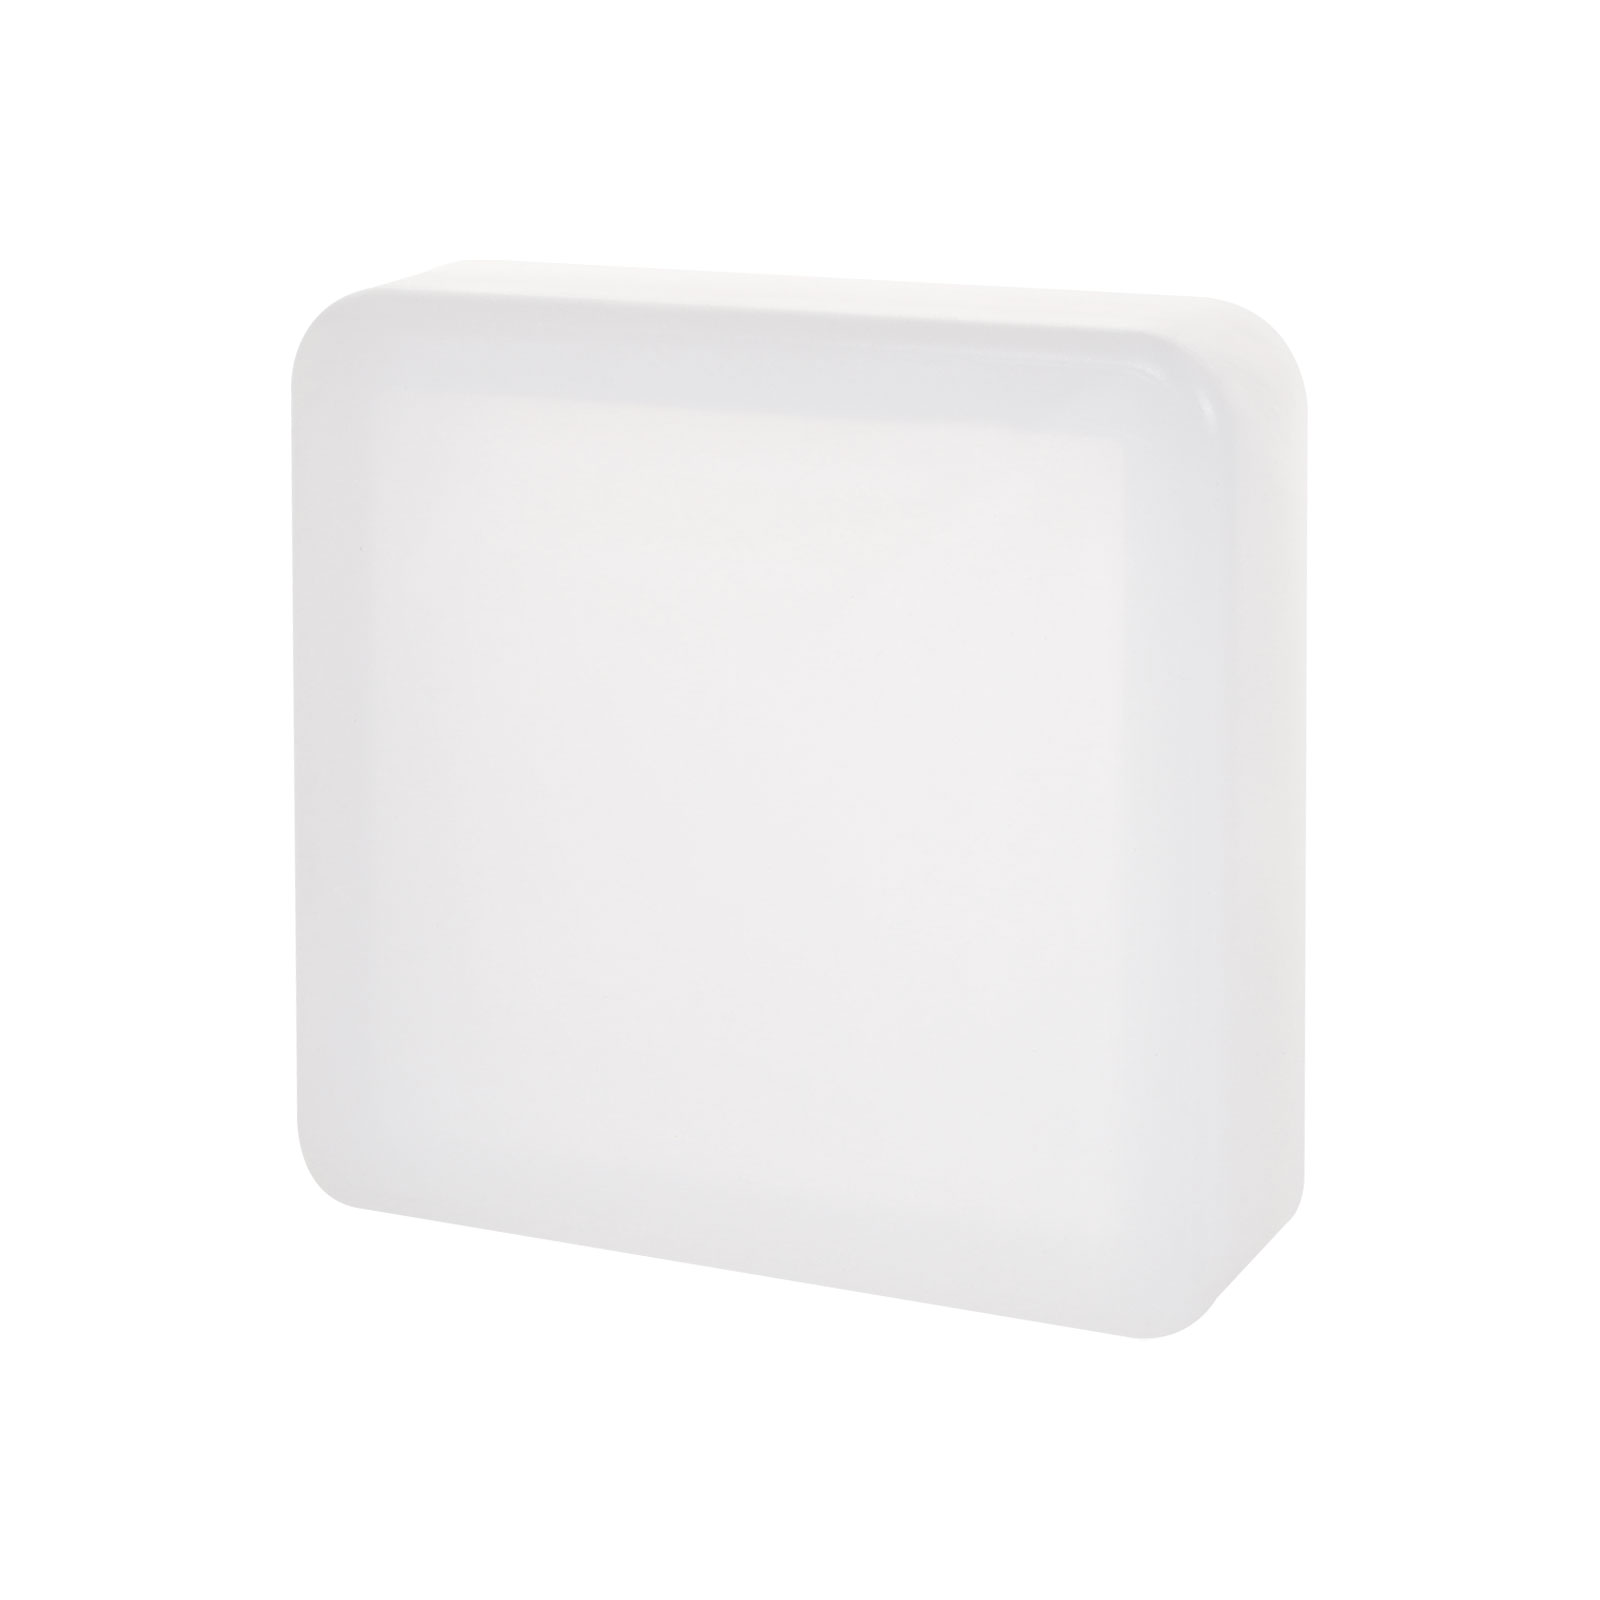 Hot Sale 14x14x3.5cm Thick Square Silicone Mold For Epoxy Resin